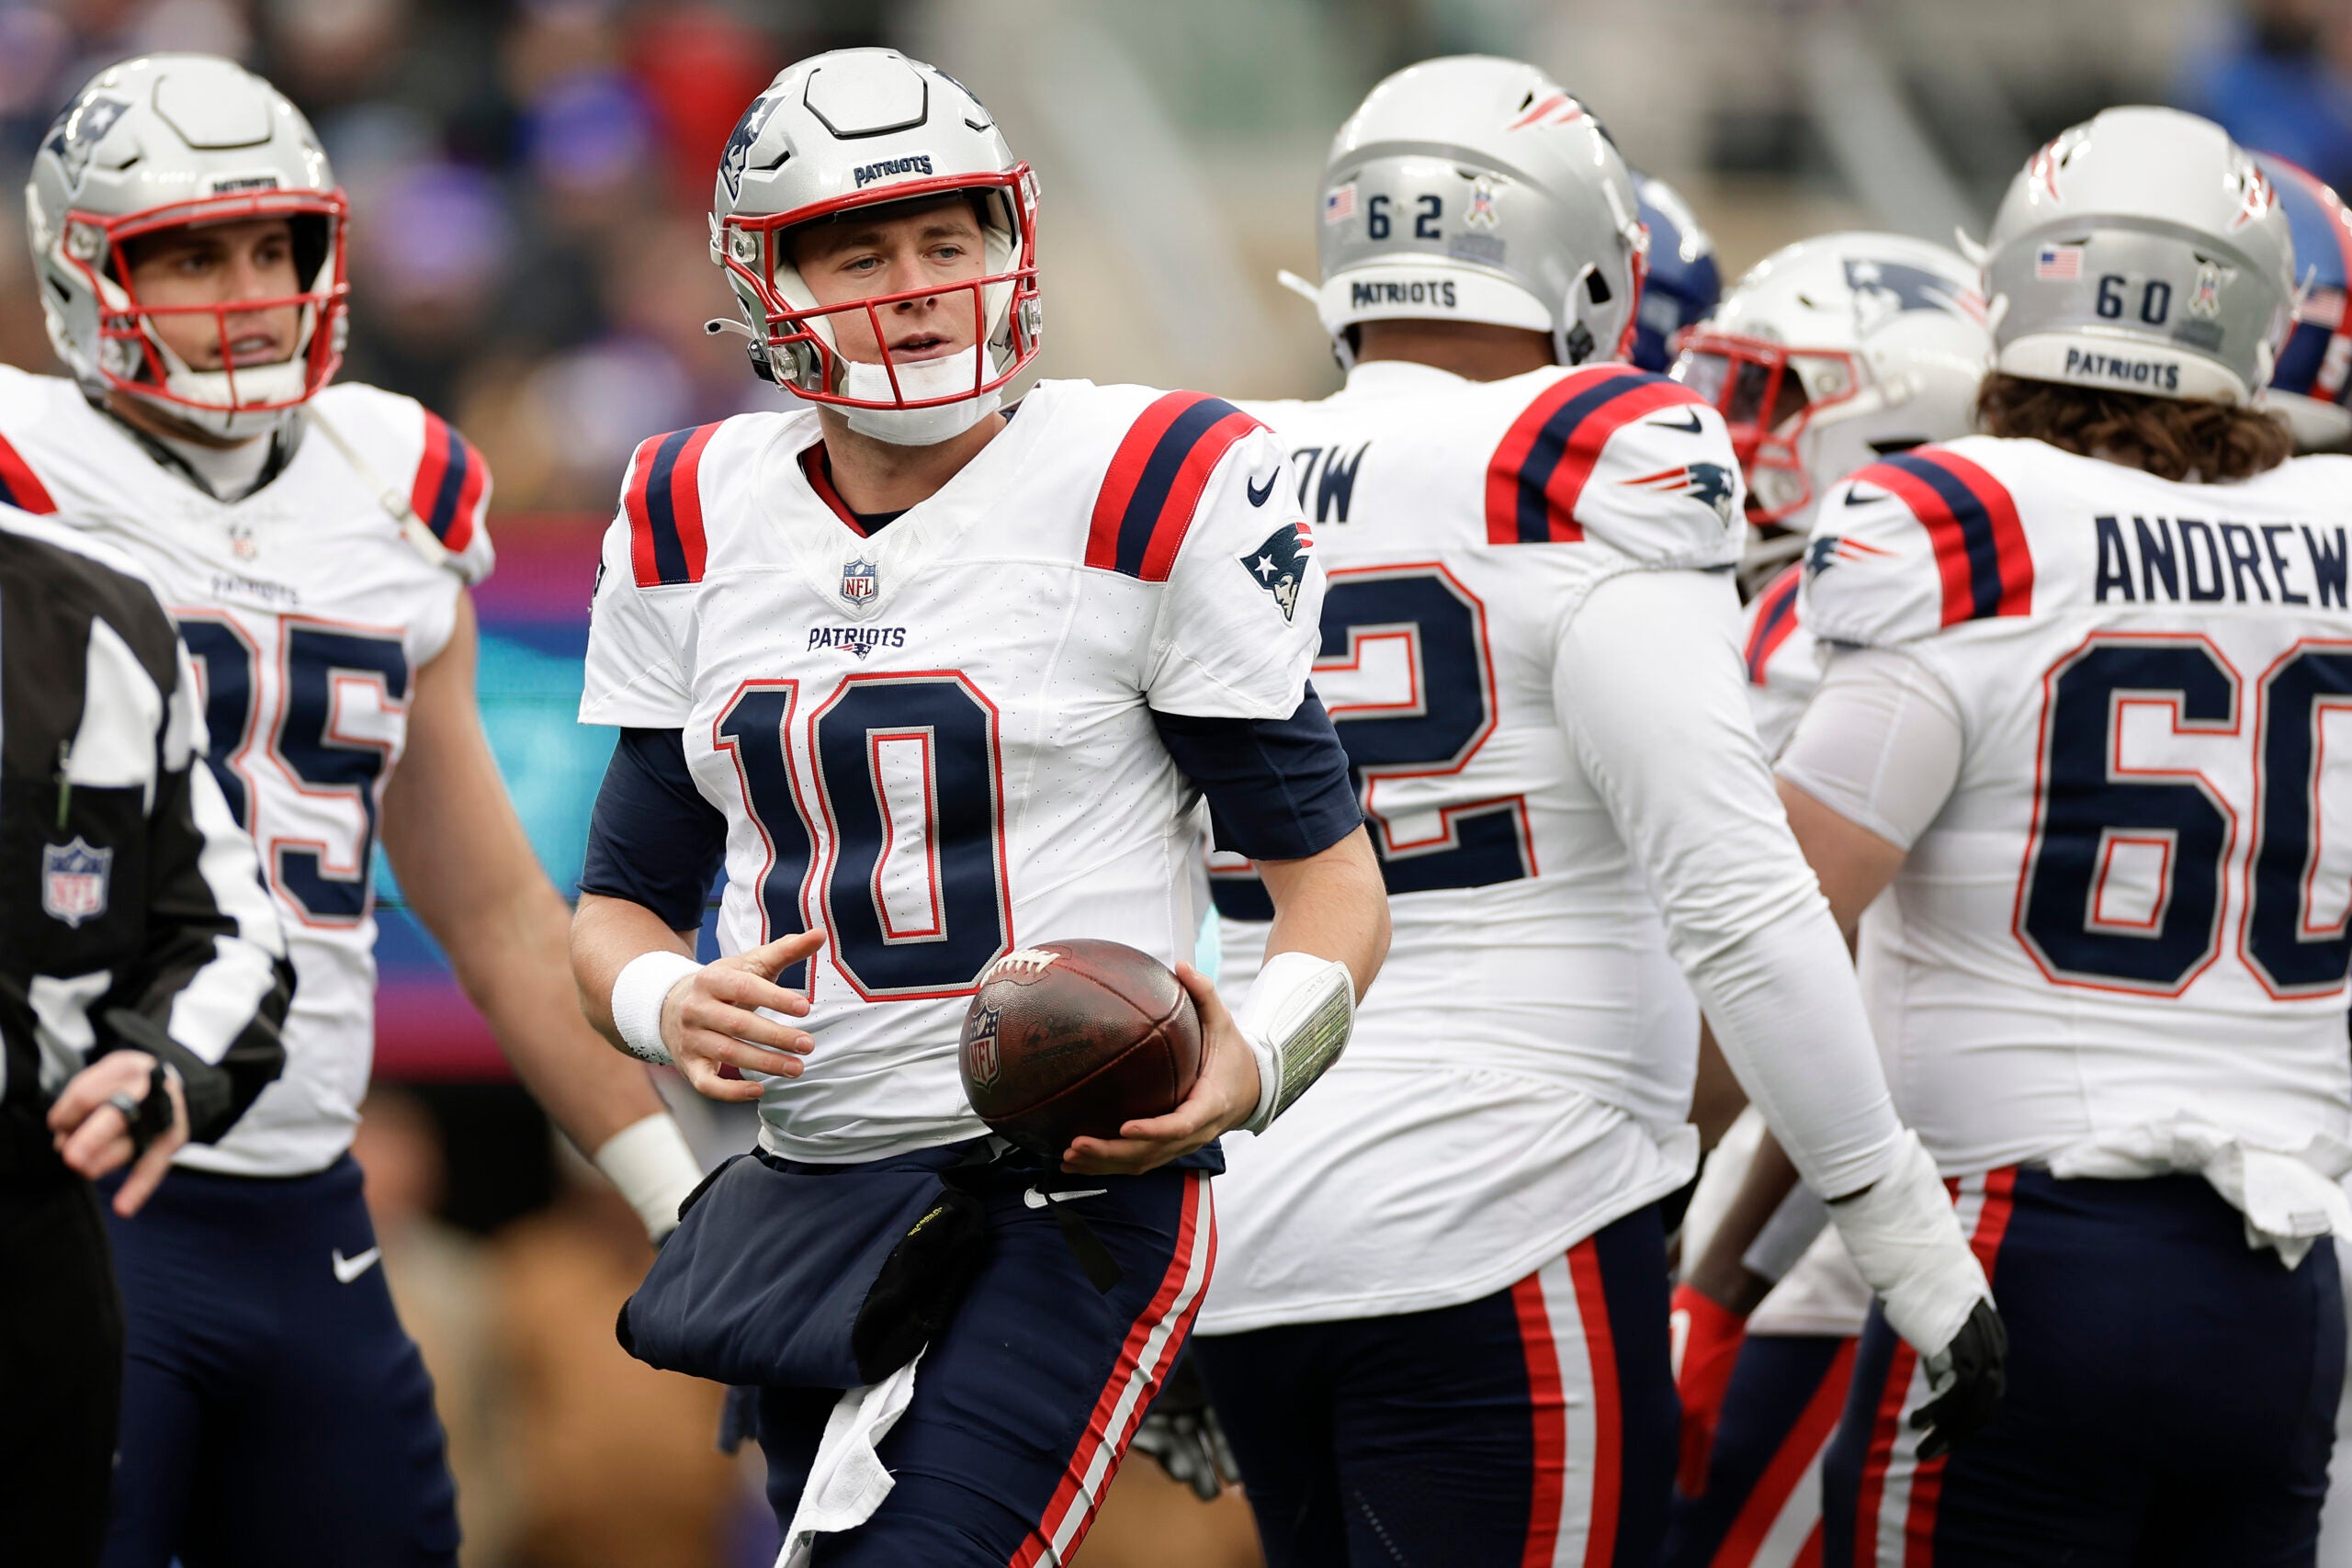 New England Patriots quarterback Mac Jones (10) walks back to the line of scrimmage after being sacked by the New York Giants during the first quarter of an NFL football game, Sunday, Nov. 26, 2023, in East Rutherford, N.J.